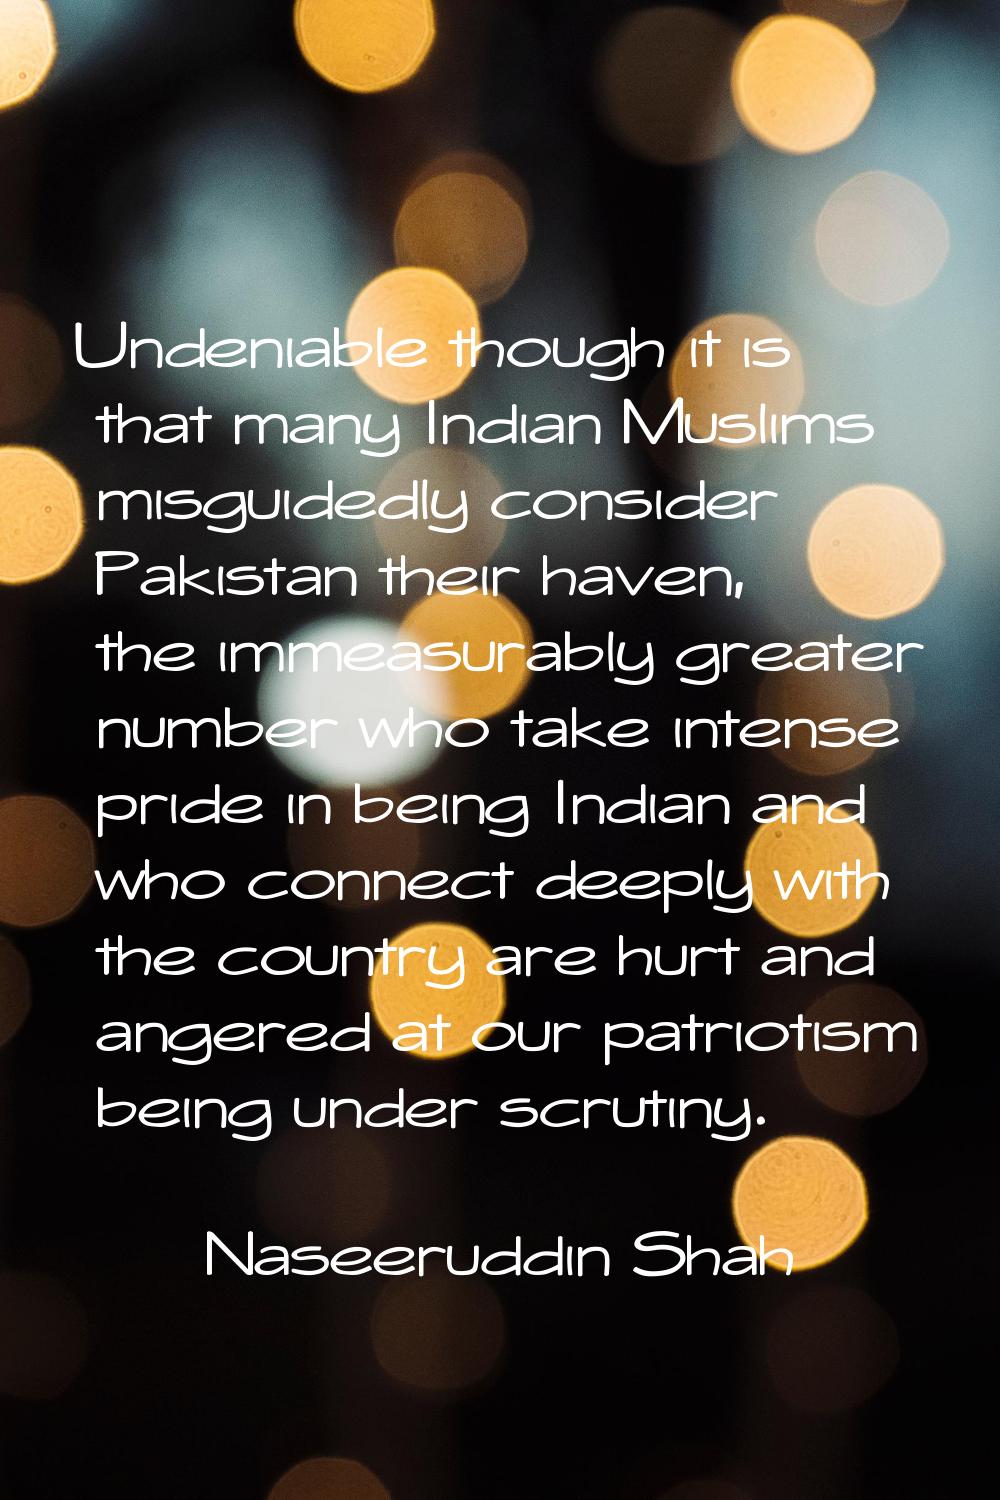 Undeniable though it is that many Indian Muslims misguidedly consider Pakistan their haven, the imm